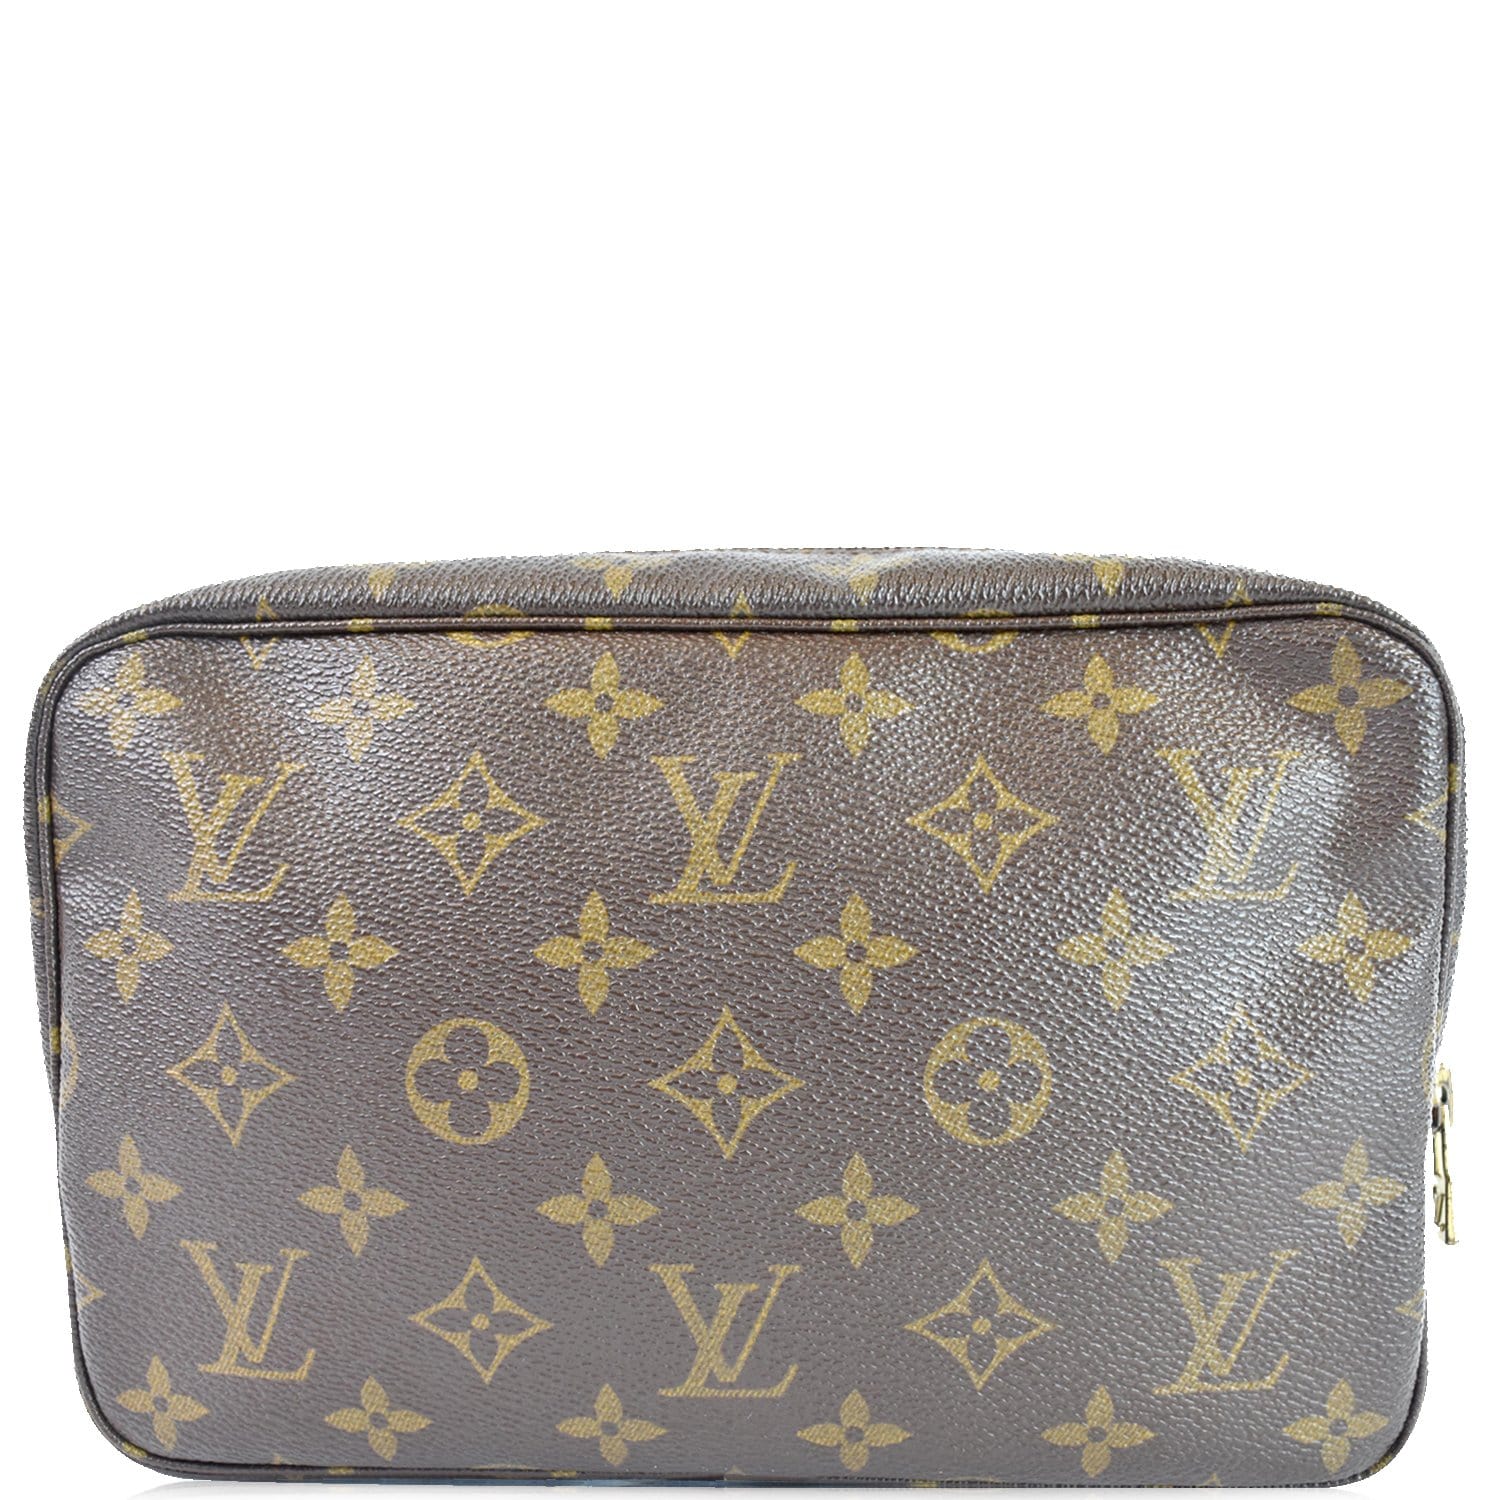 Authentic Pre-Owned Louis Vuitton Monogram Trousse 23 Cosmetic